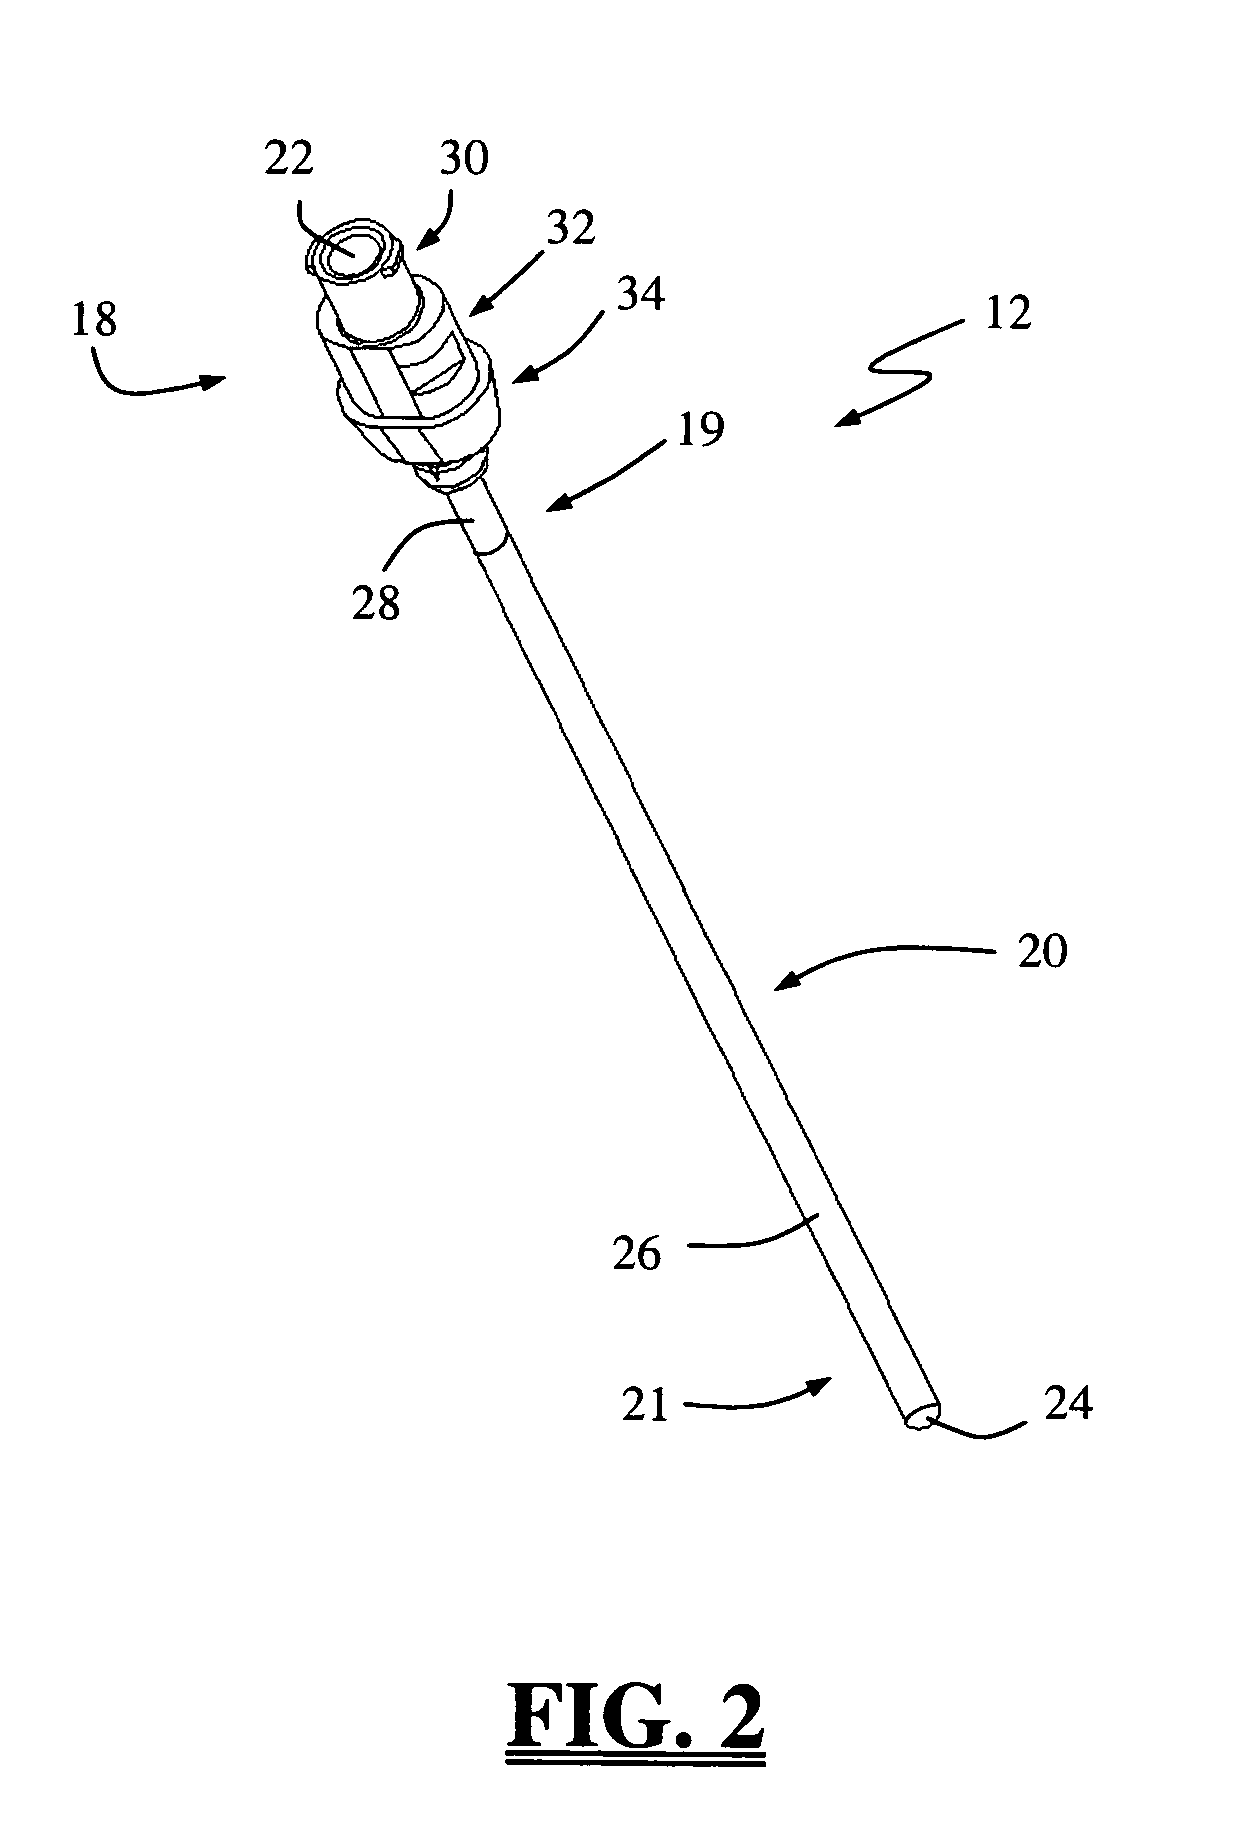 Insulated pedicle access system and related methods